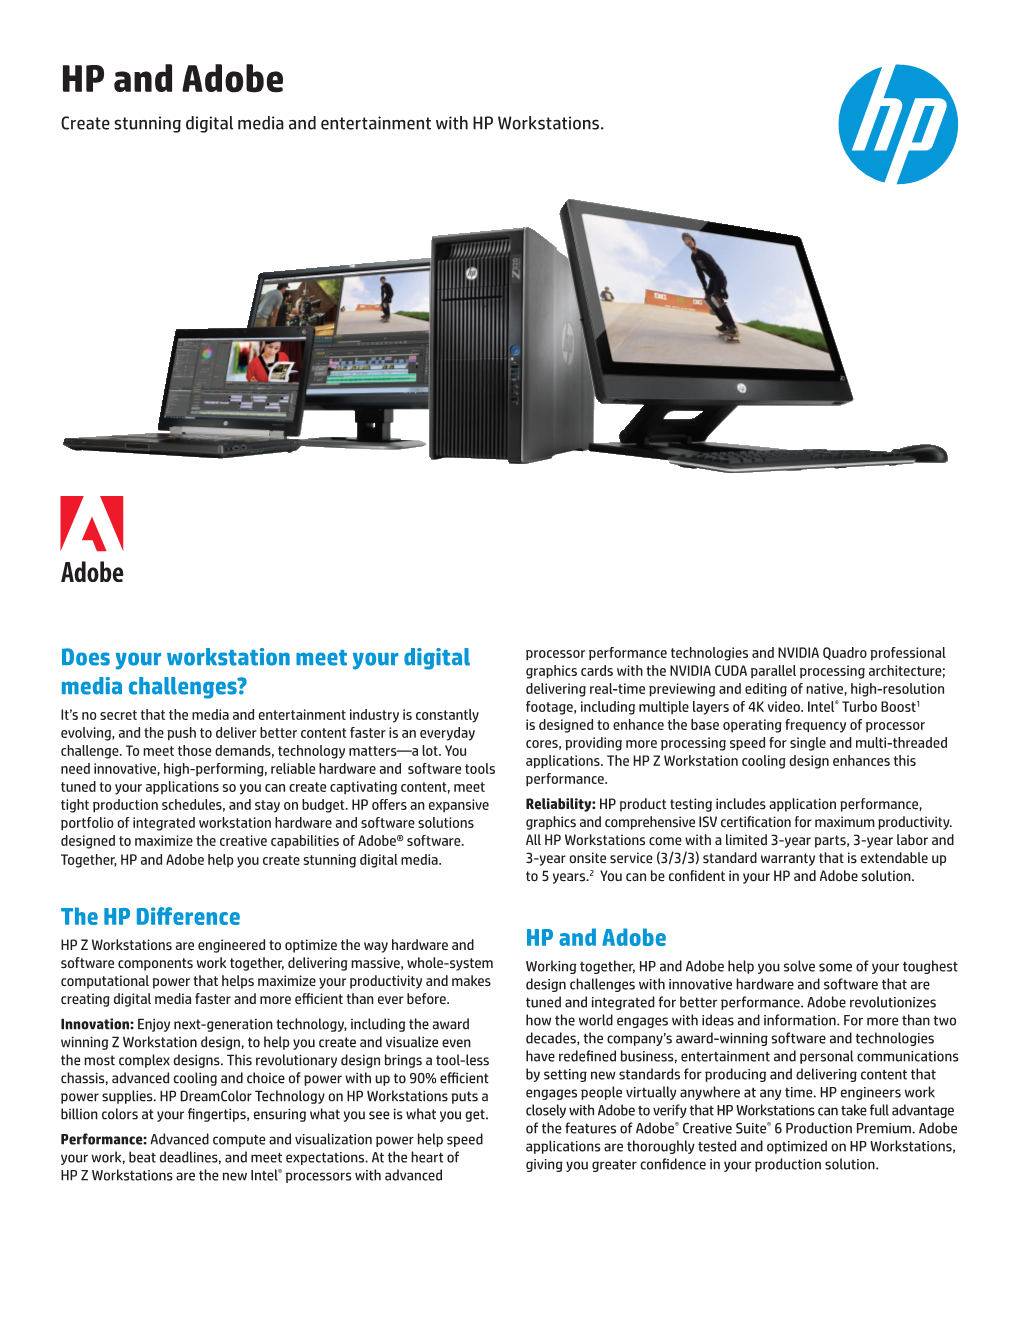 HP and Adobe Create Stunning Digital Media and Entertainment with HP Workstations